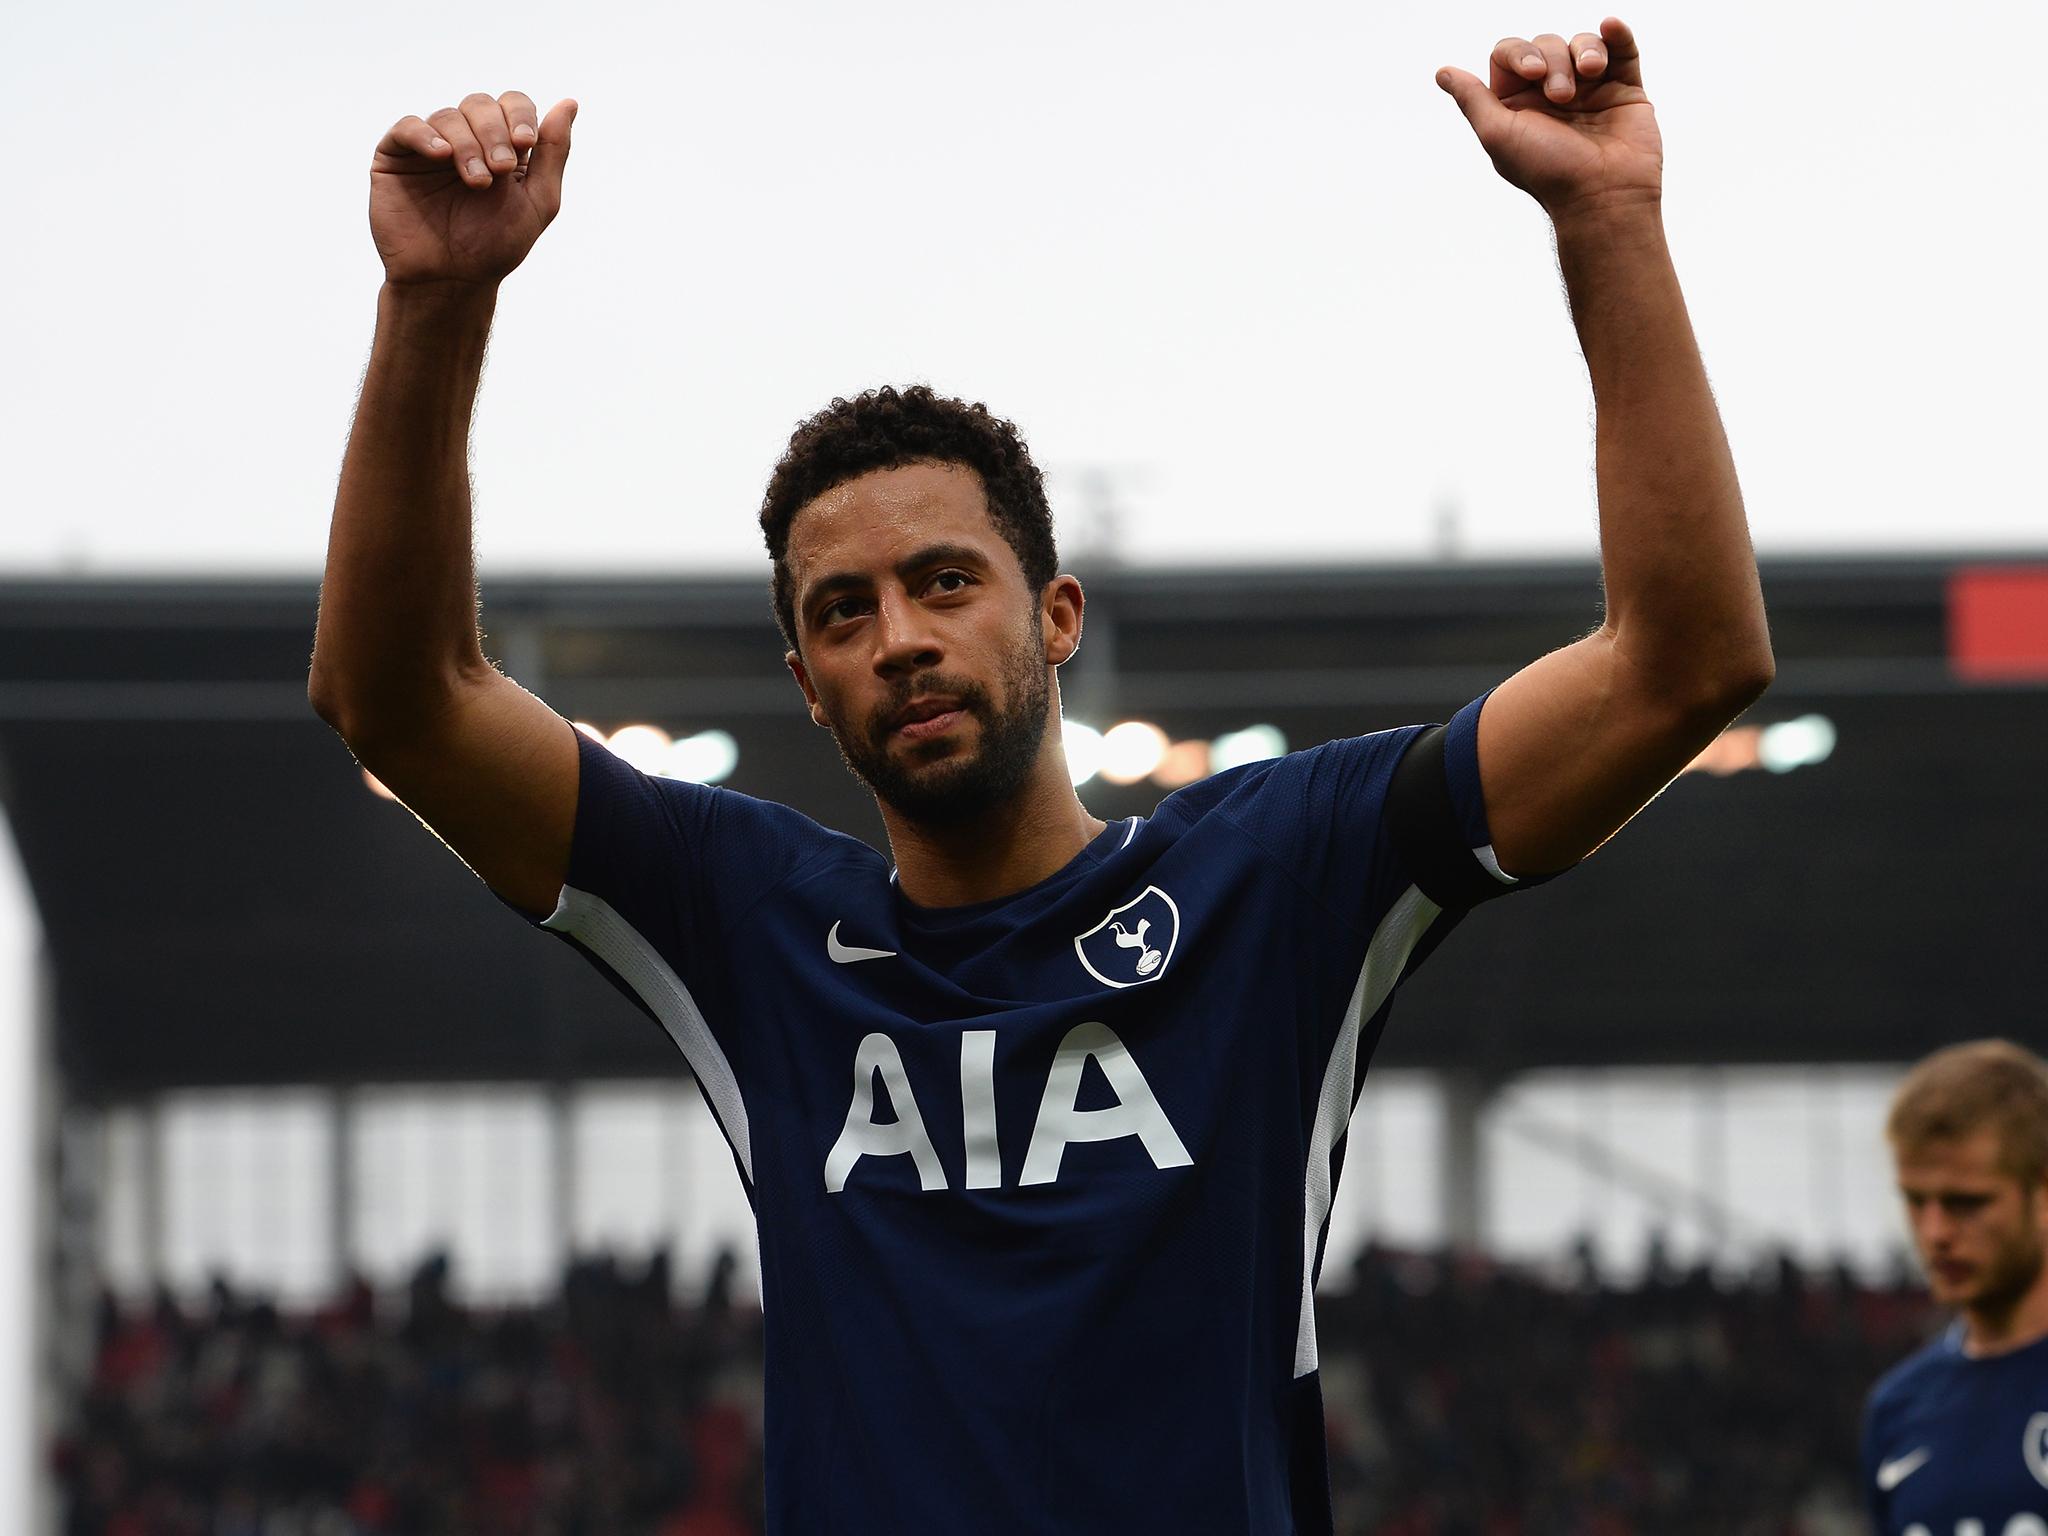 Mousa Dembele is set to leave Tottenham at the end of the season to move to either China or Italy